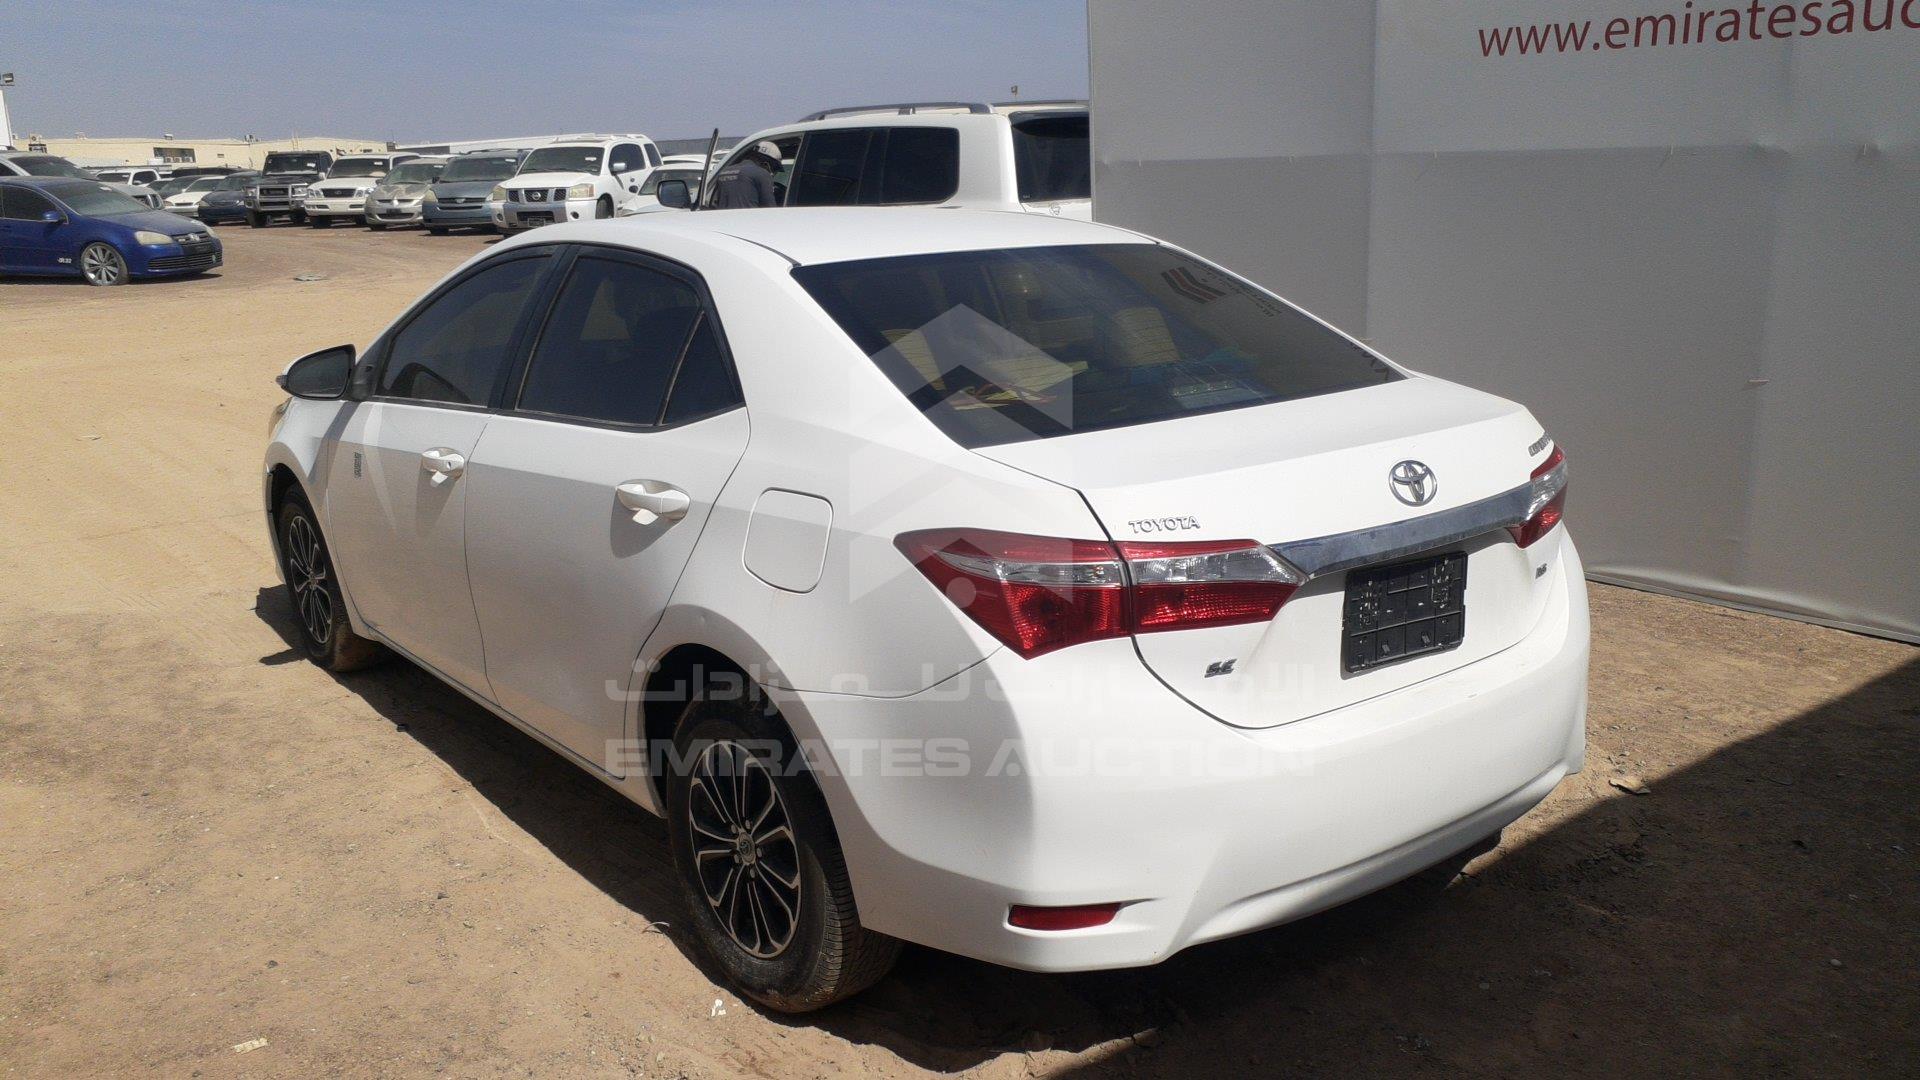 image 2 12 - corolla 2014 price 7000 in auction